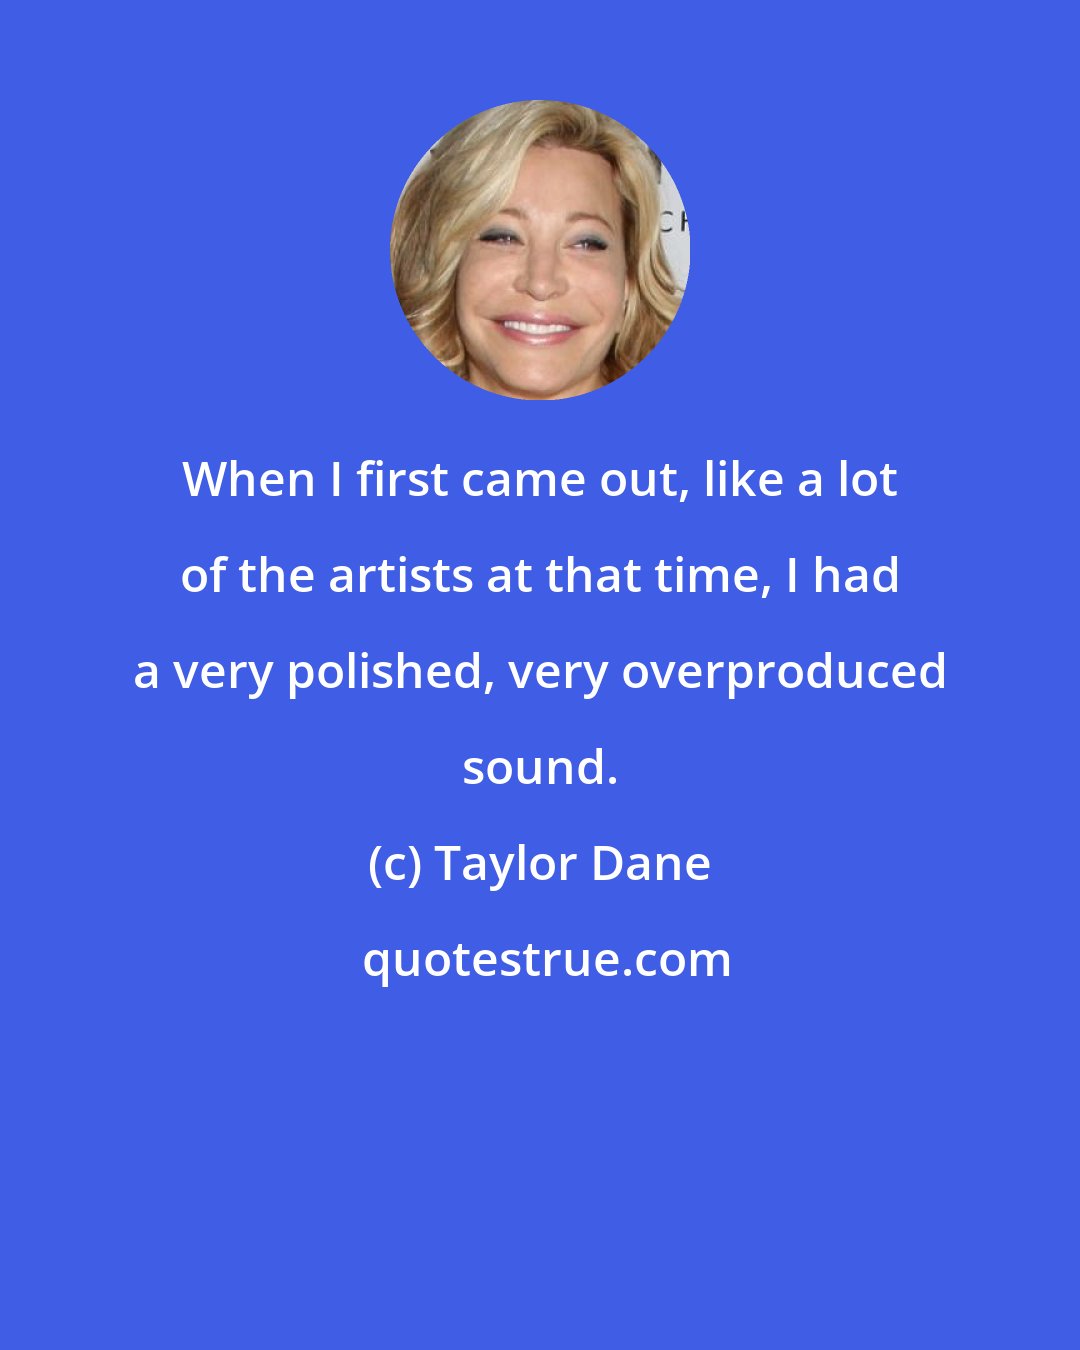 Taylor Dane: When I first came out, like a lot of the artists at that time, I had a very polished, very overproduced sound.